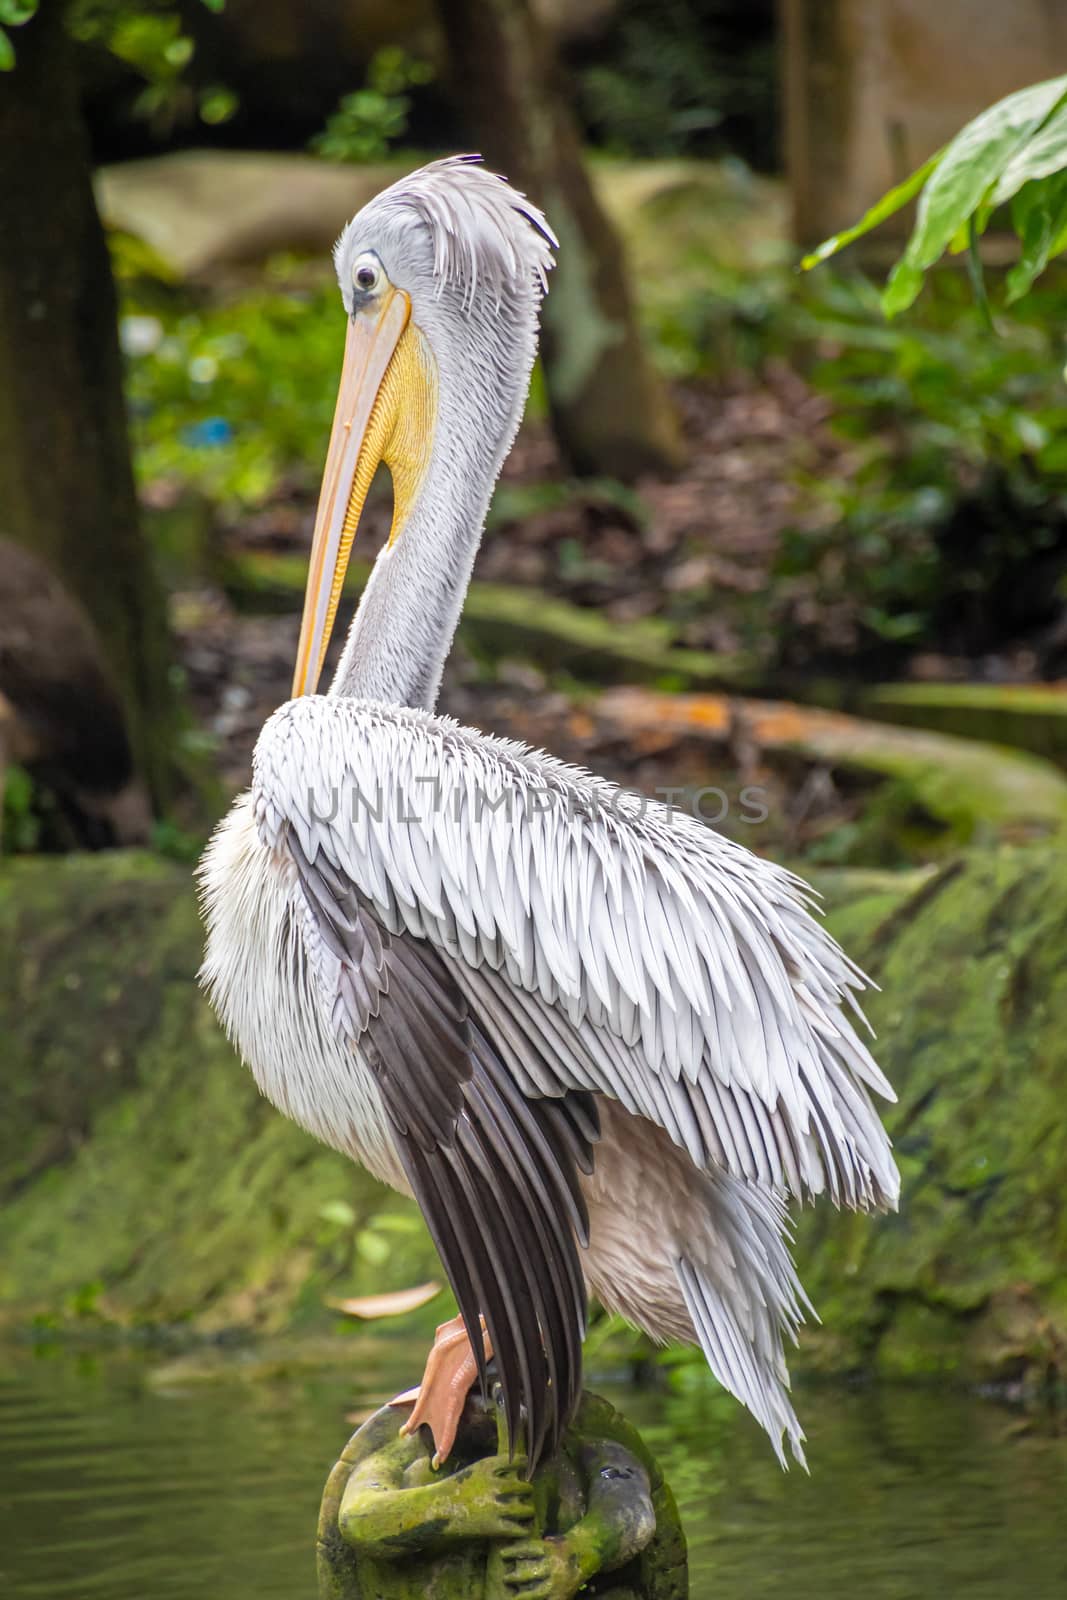 Pelican with wet feathers and long tail resting on sculpture in park in Malaysia by MXW_Stock